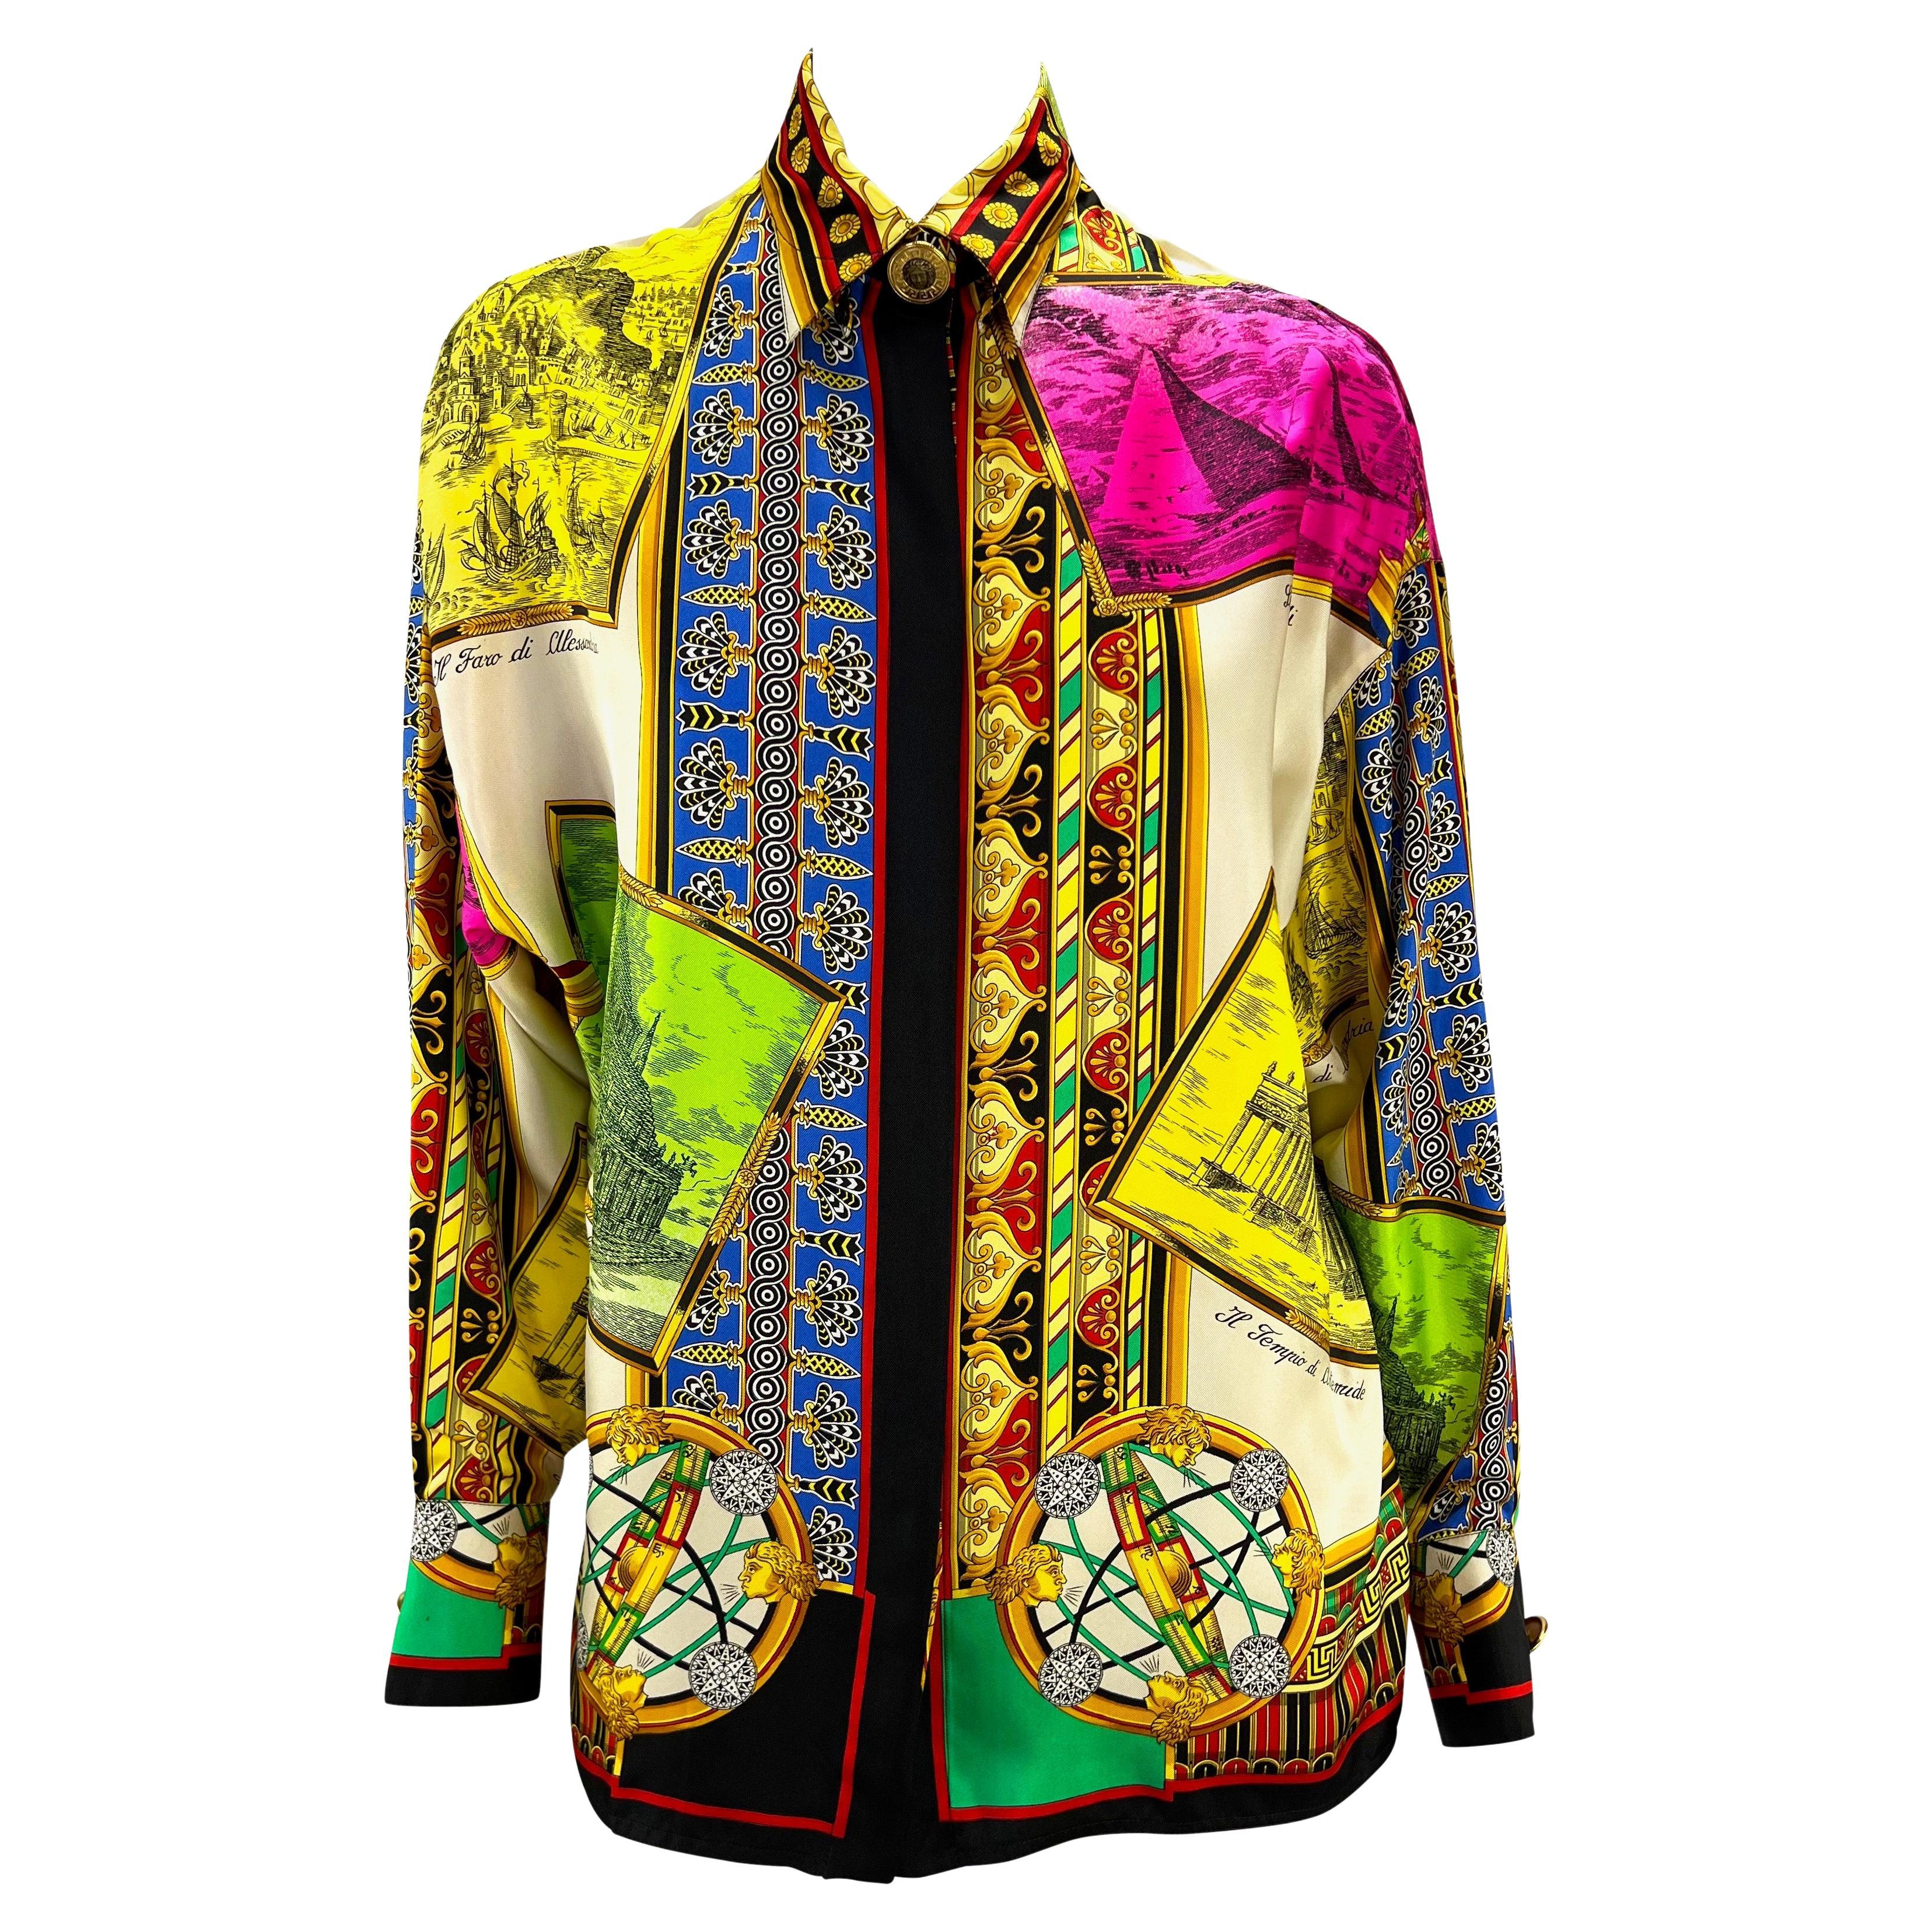 S/S 1993 Gianni Versace Couture Printed Silk Medusa Medallion Button Down Top For Sale